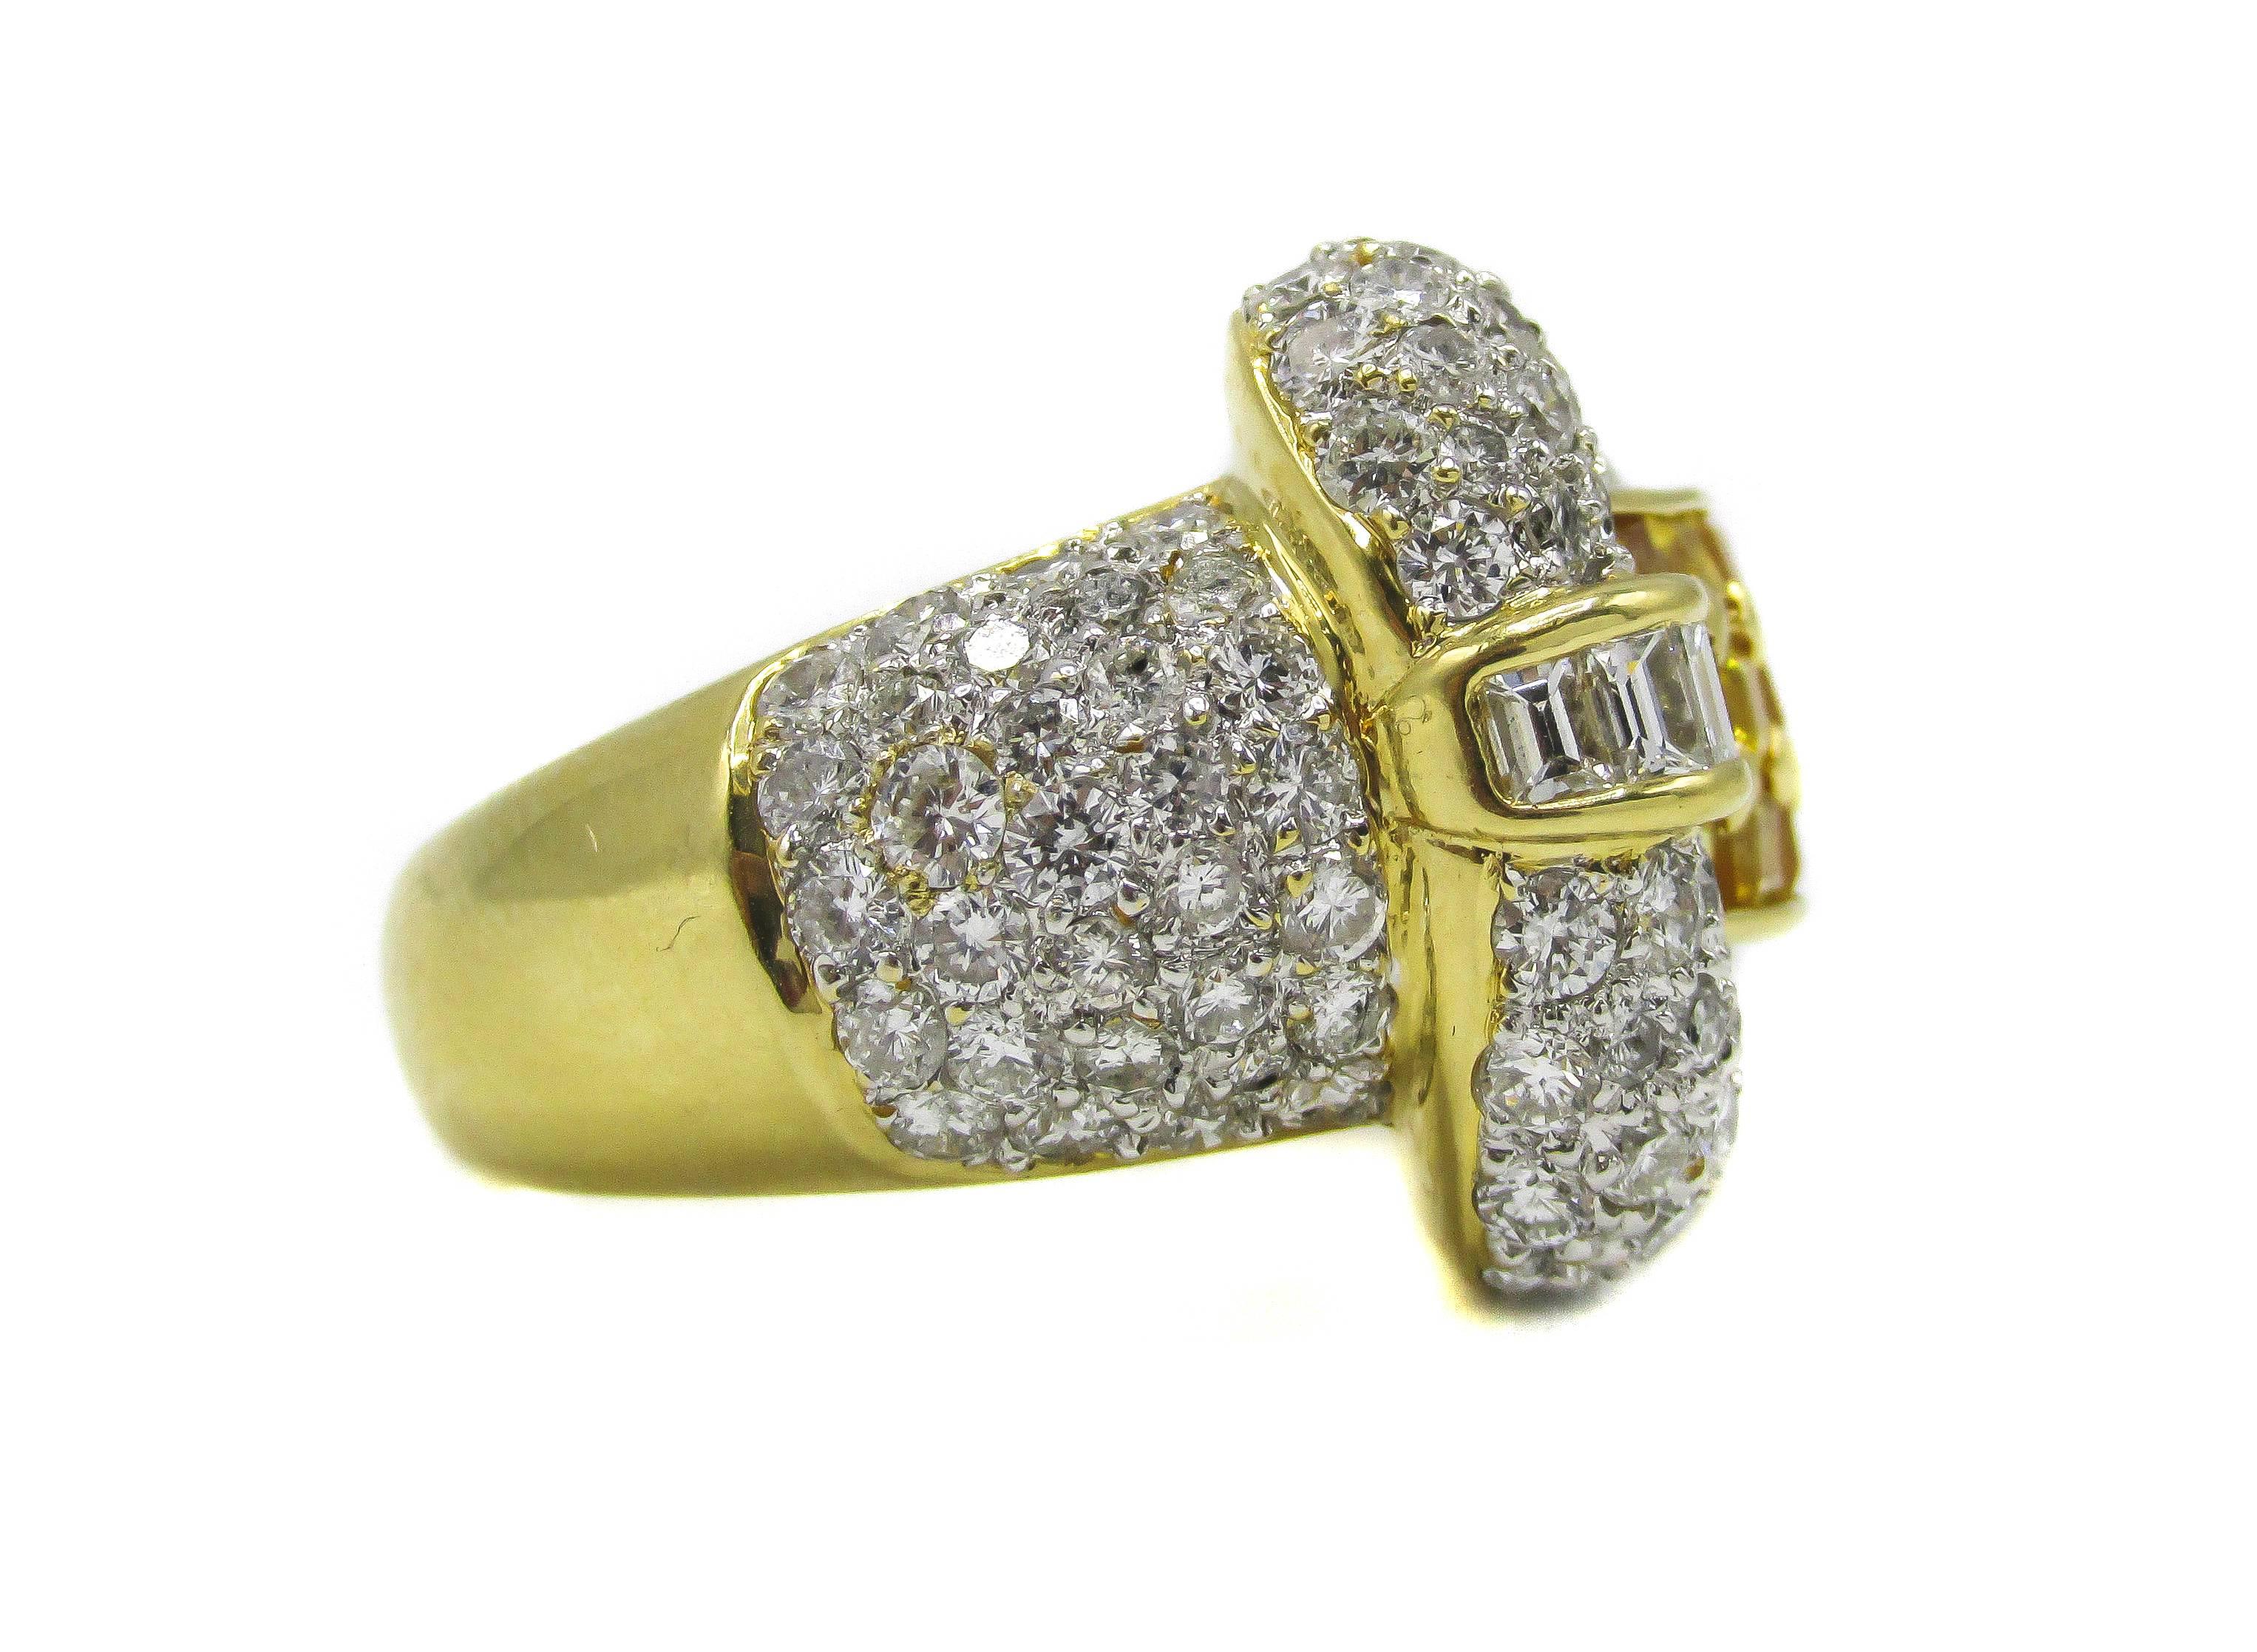 Yellow Sapphire Diamond 18 Karat Gold Ring In Excellent Condition For Sale In New York, NY